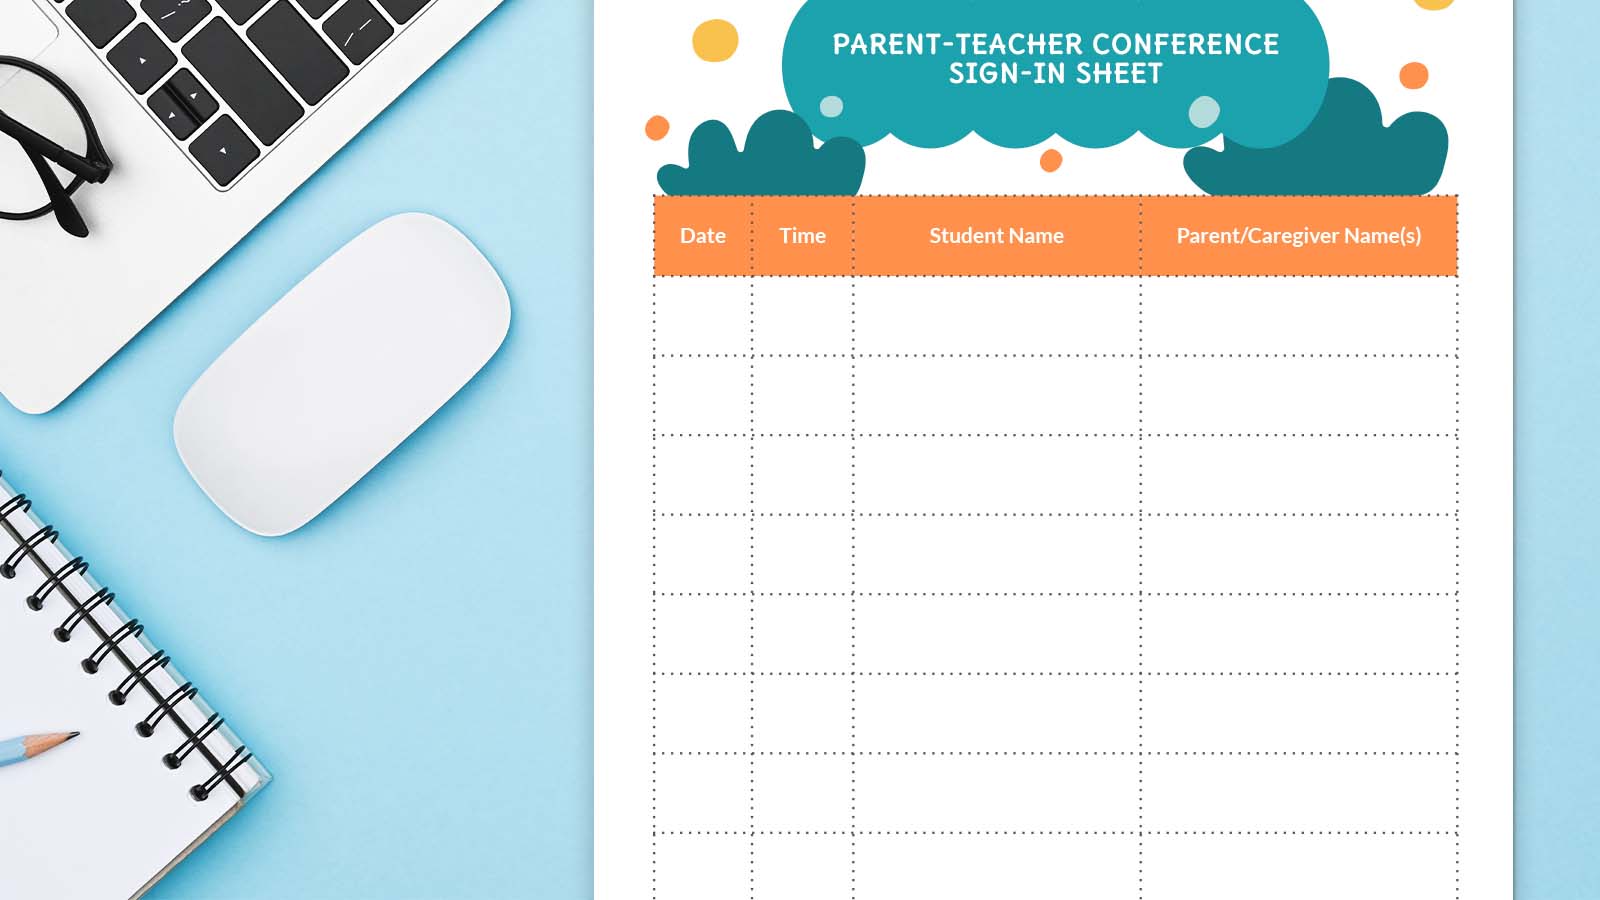 Parent-teacher conference sign-in sheet on a desk with mouse, laptop, and notebook.